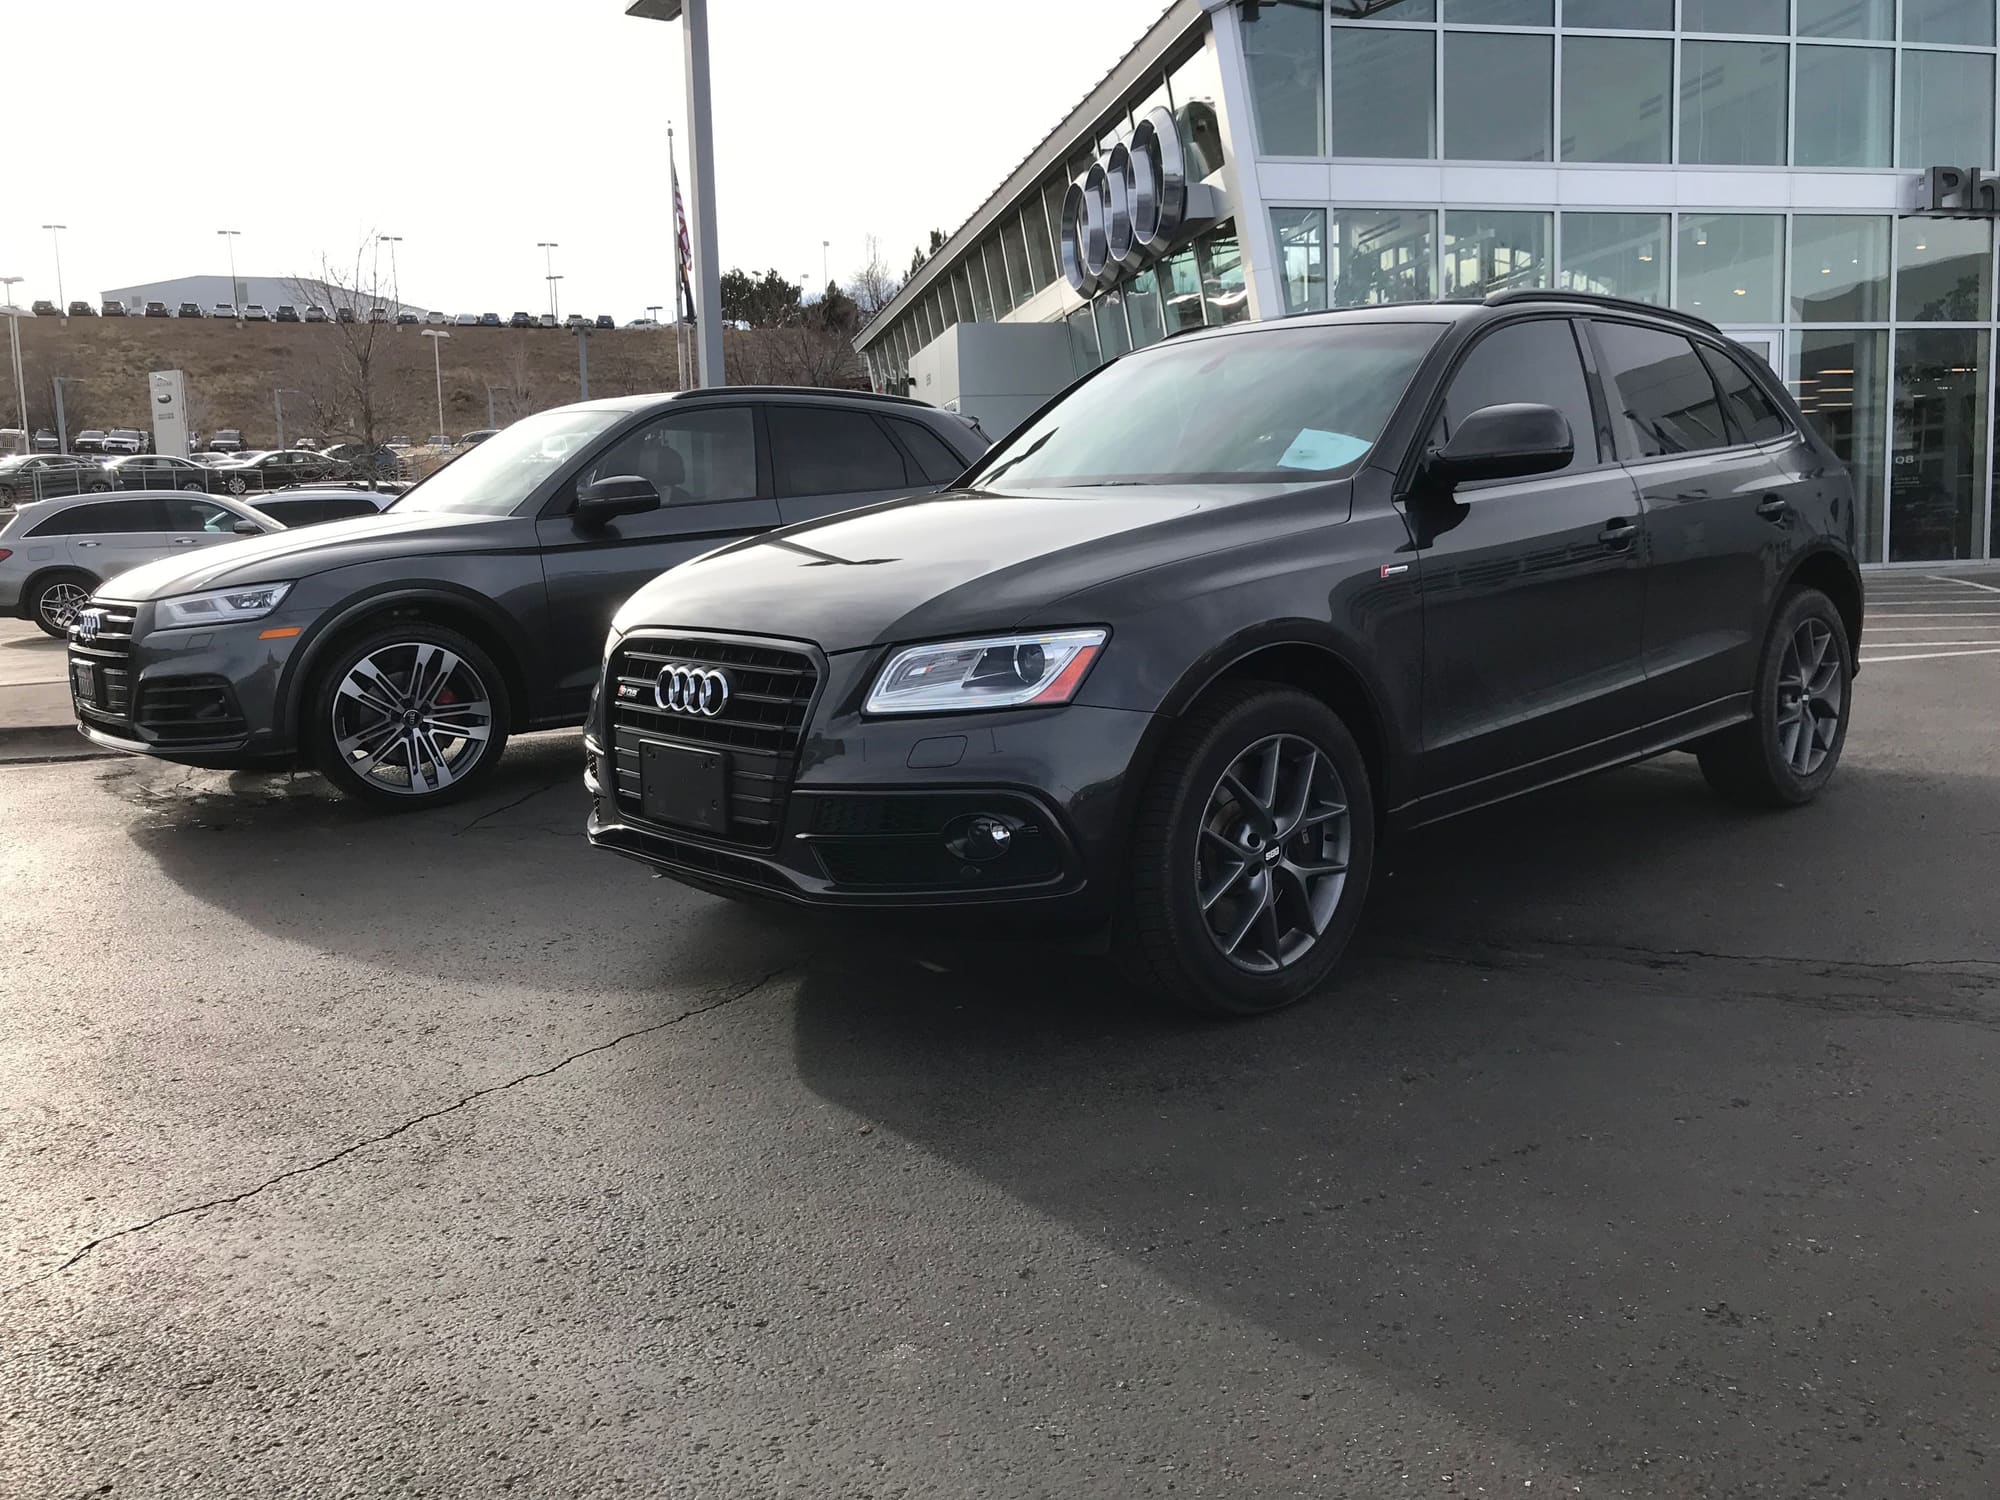 Traded 2015 Sq5 For 2019 Sq5 Audiworld Forums